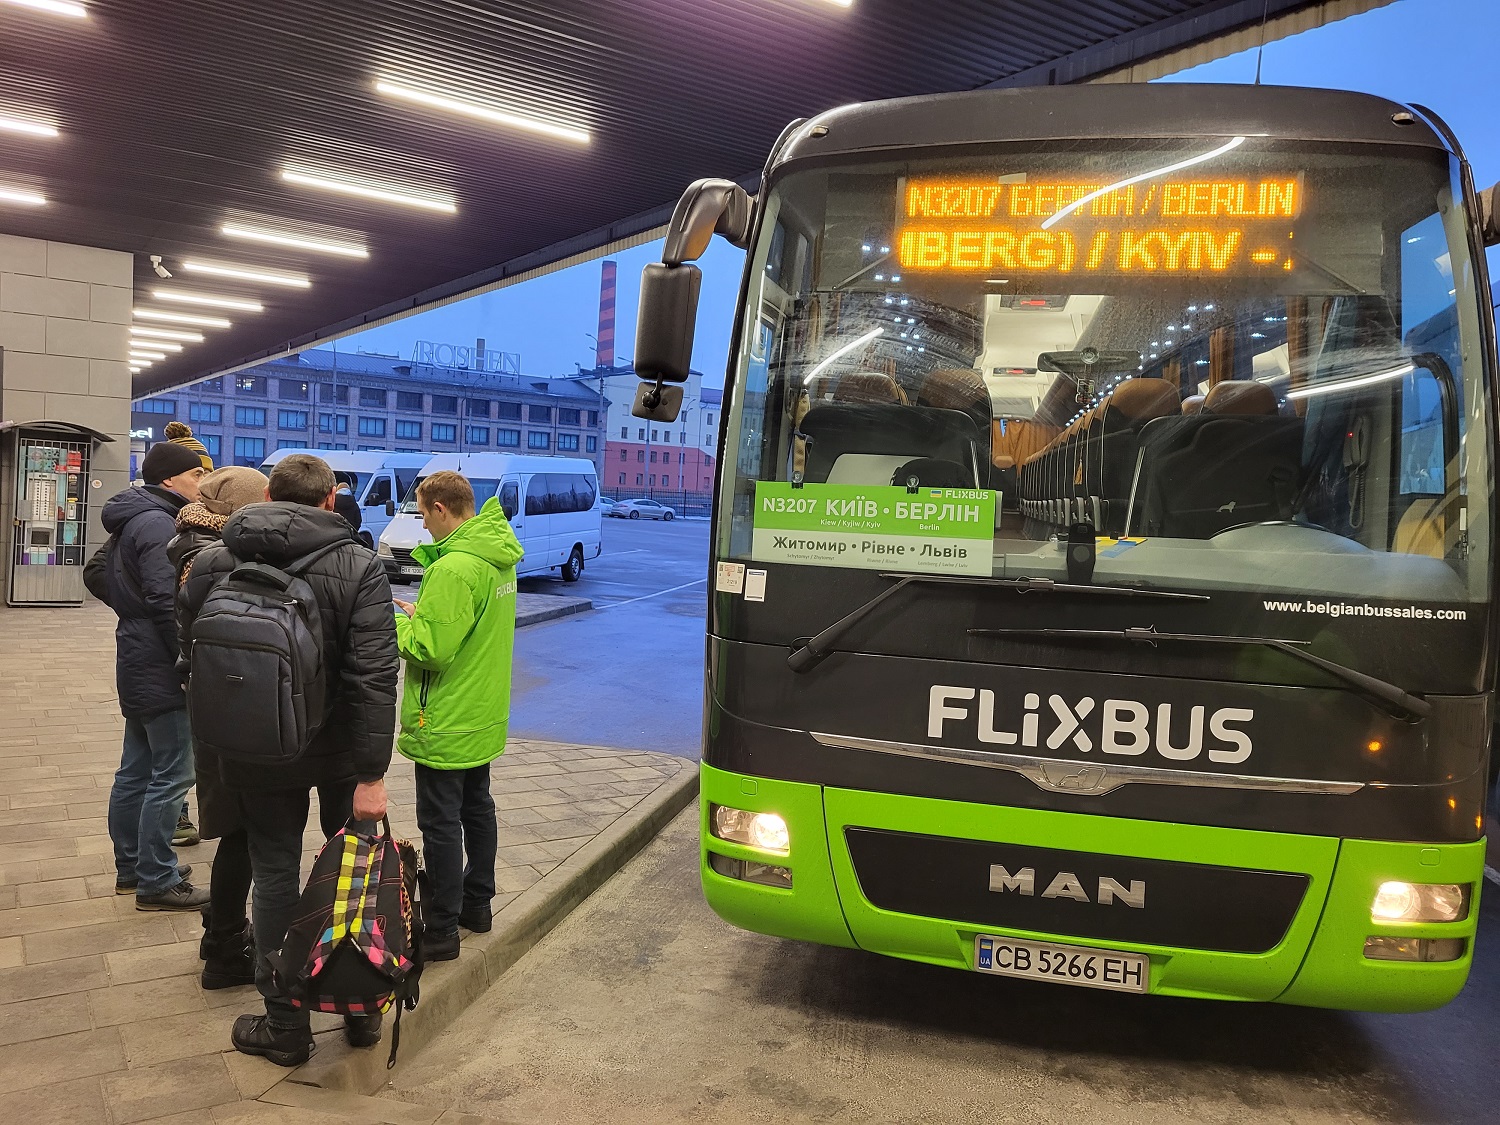 Ukraine-Germany route launched by FlixBus